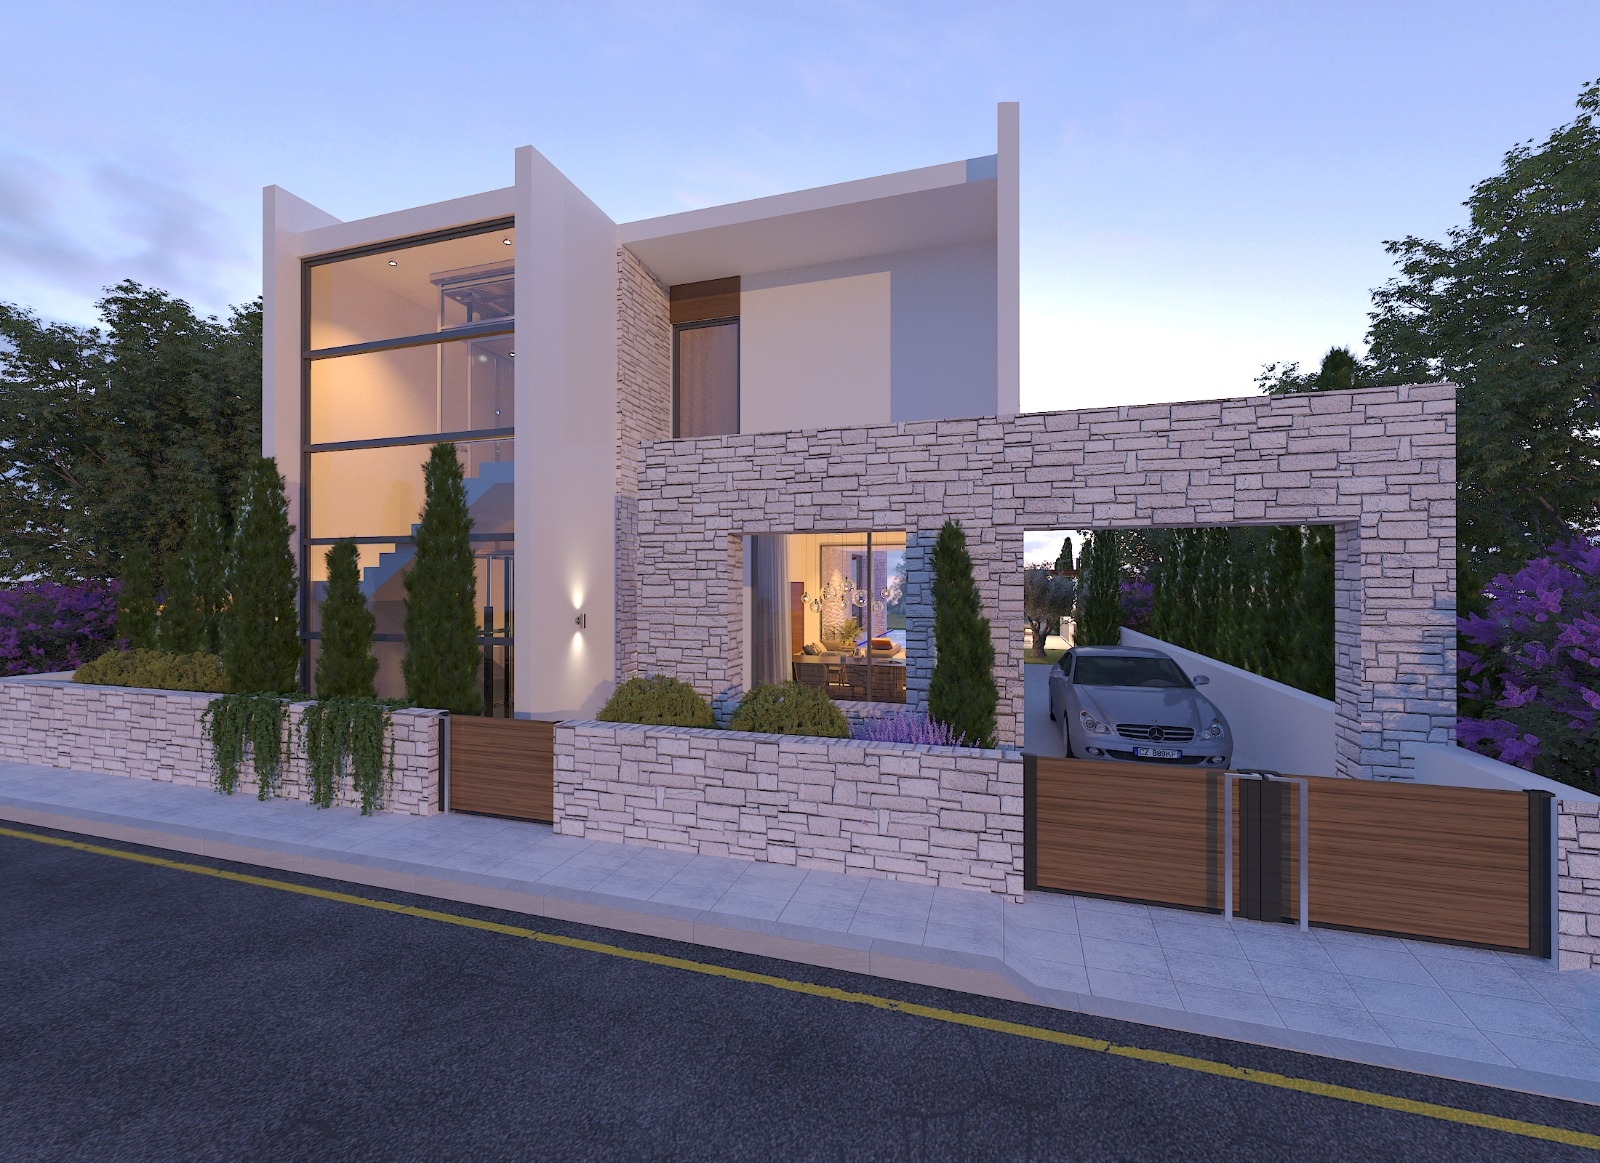 4 Bedroom House for Sale in Tombs Of the Kings, Paphos District